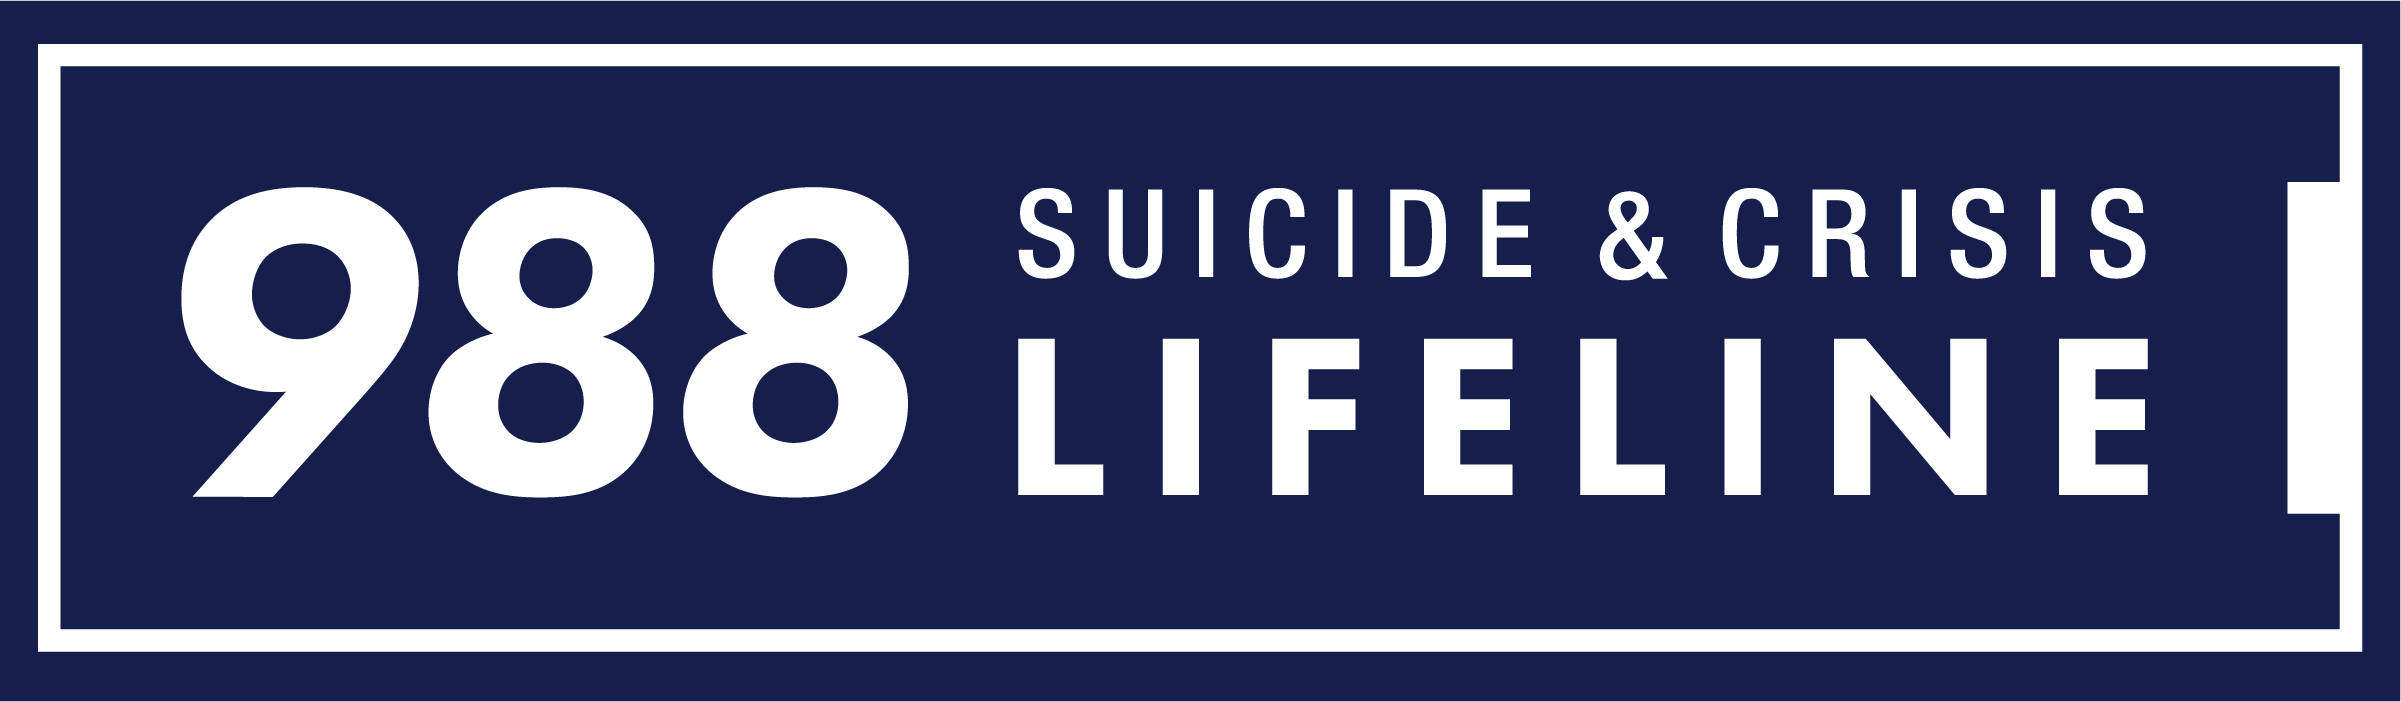 Learn How Safety Plans Prevent Suicide